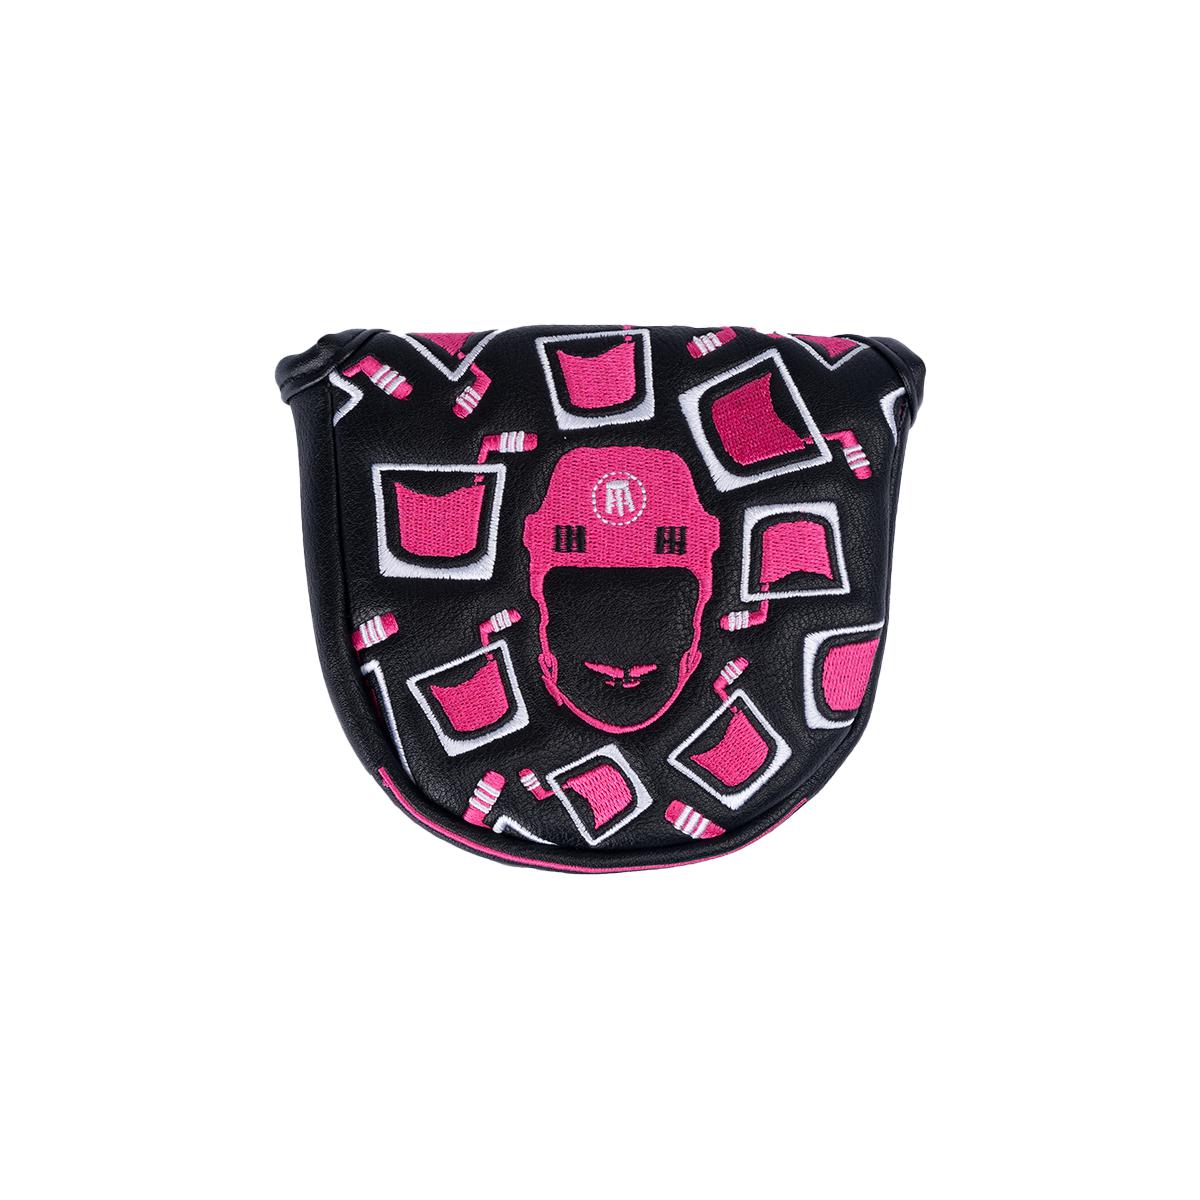 Pink Whitney Mallet Putter Cover-Golf Accessories-Pink Whitney-Black-One Size-Barstool Sports